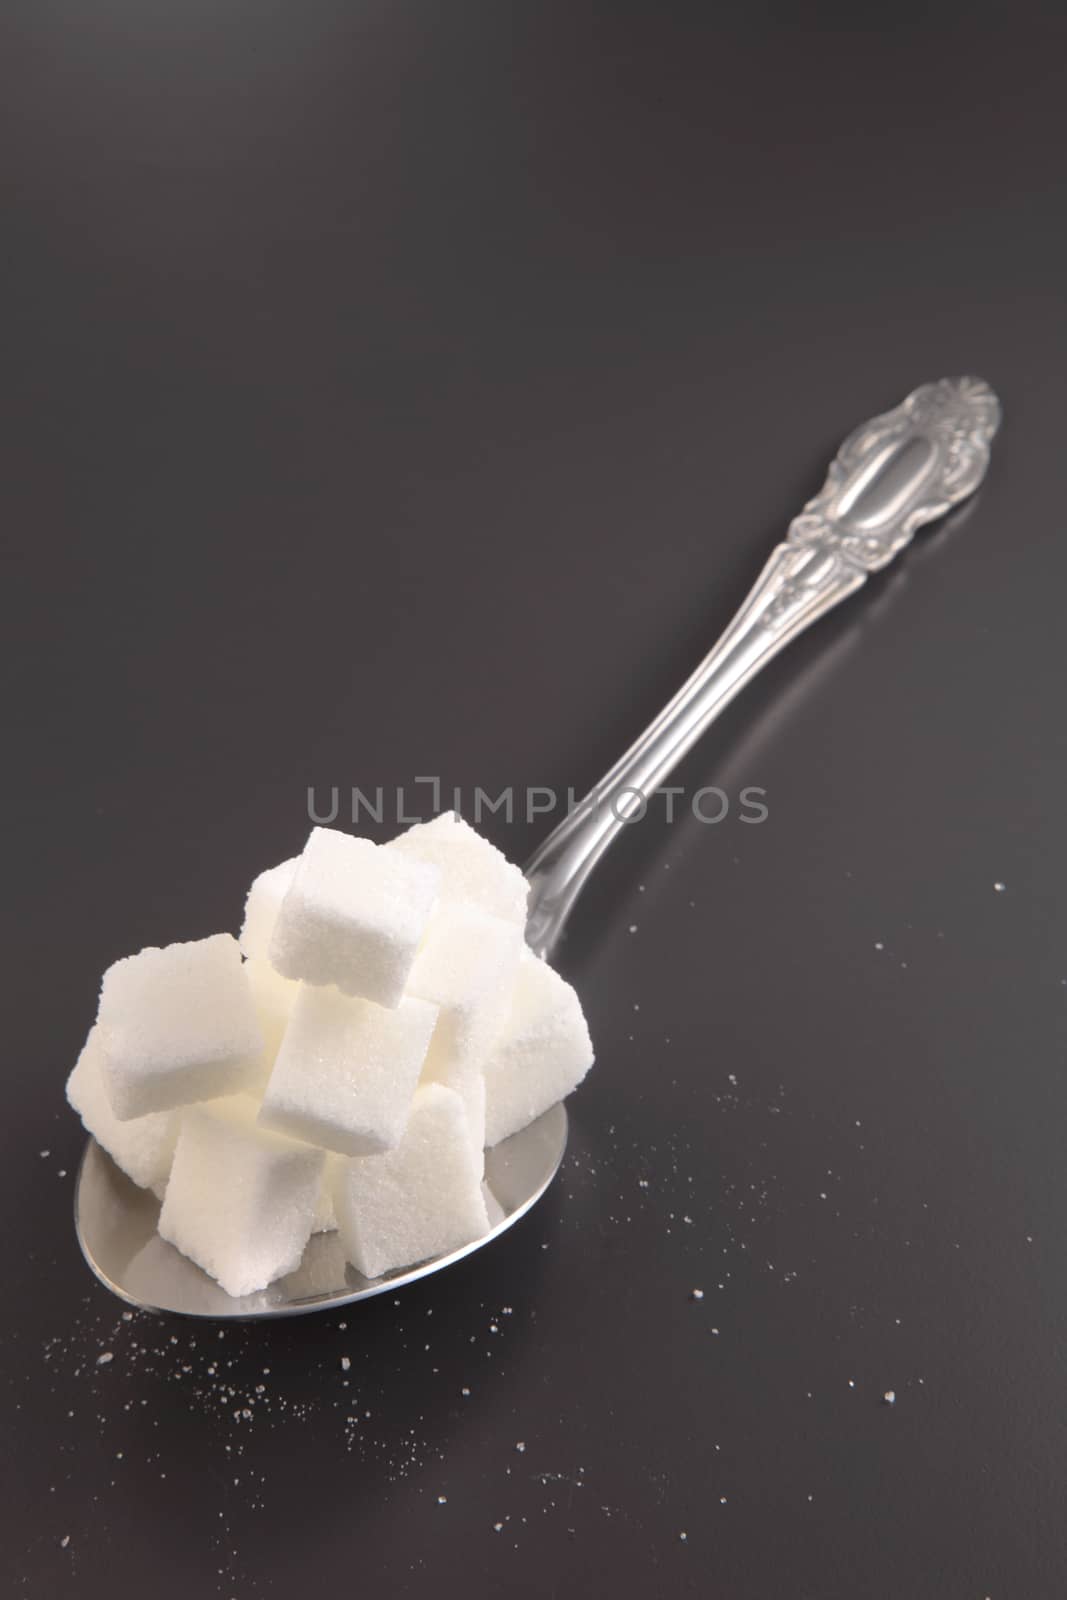 big or super size spoon with pile of cube white sugar